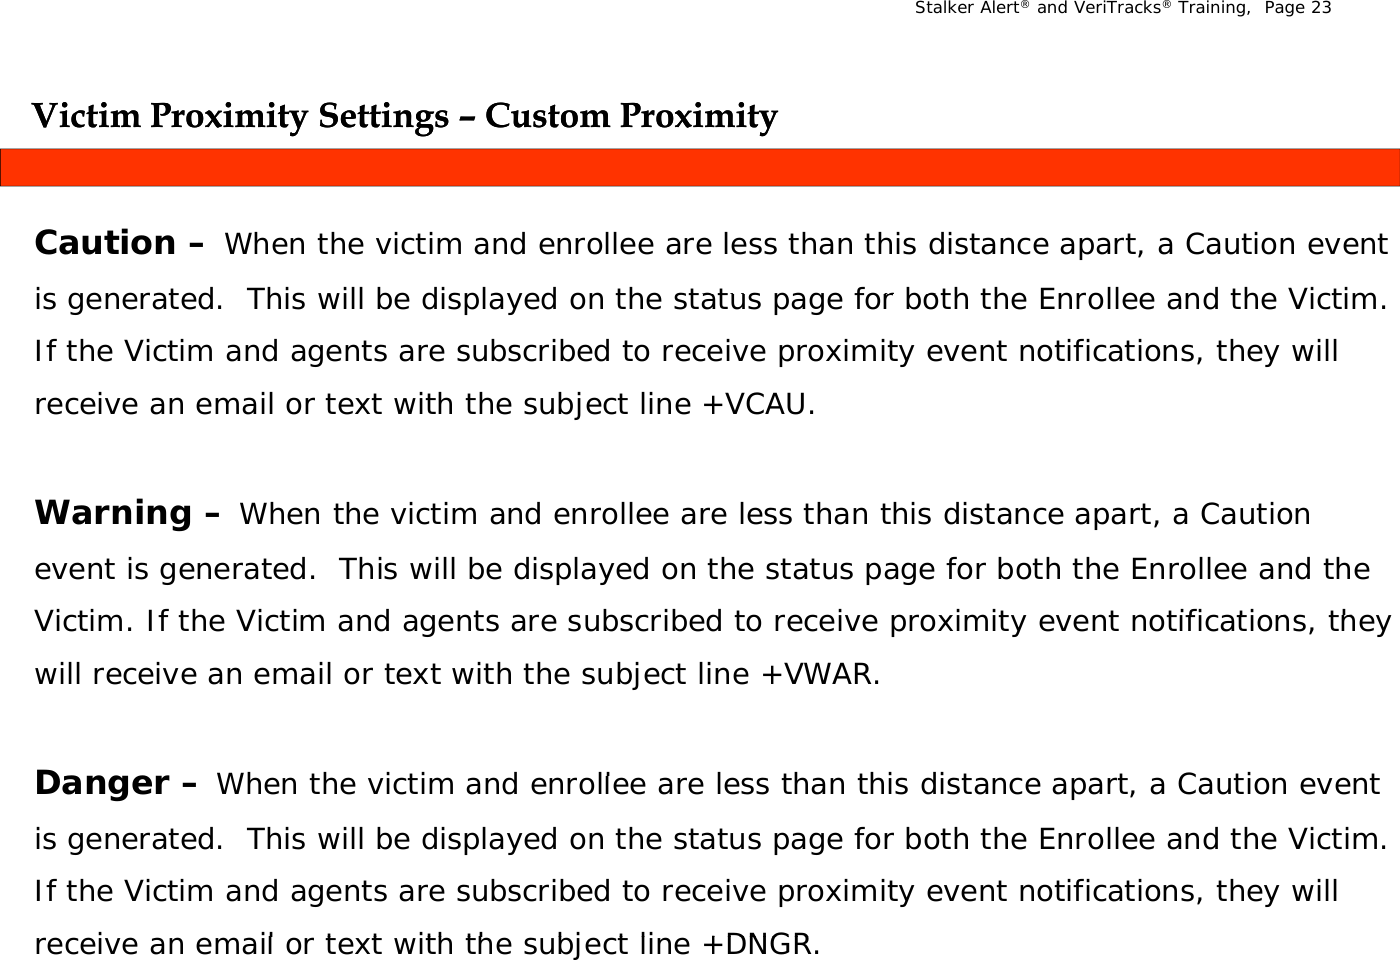 Stalker Alert®and VeriTracks®Training,  Page 23Victim Proximity Settings Victim Proximity Settings –– Custom ProximityCustom ProximityygygyyCaution – When the victim and enrollee are less than this distance apart, a Caution event is generated   This will be displayed on the status page for both the Enrollee and the Victim  is generated.  This will be displayed on the status page for both the Enrollee and the Victim. If the Victim and agents are subscribed to receive proximity event notifications, they will receive an email or text with the subject line +VCAU.Warning – When the victim and enrollee are less than this distance apart, a Caution event is generated.  This will be displayed on the status page for both the Enrollee and the Victim  If the Victim and agents a e s bsc ibed to  ecei e p o imit  e ent notifications  the  Victim. If the Victim and agents are subscribed to receive proximity event notifications, they will receive an email or text with the subject line +VWAR.Dange  Wh  th   i ti   d  ll    l  th  thi  di t   t    C ti   t Danger –When the victim and enrollee are less than this distance apart, a Caution event is generated.  This will be displayed on the status page for both the Enrollee and the Victim. If the Victim and agents are subscribed to receive proximity event notifications, they will i     il   t t  ith th   bj t li  +DNGRreceive an email or text with the subject line +DNGR.